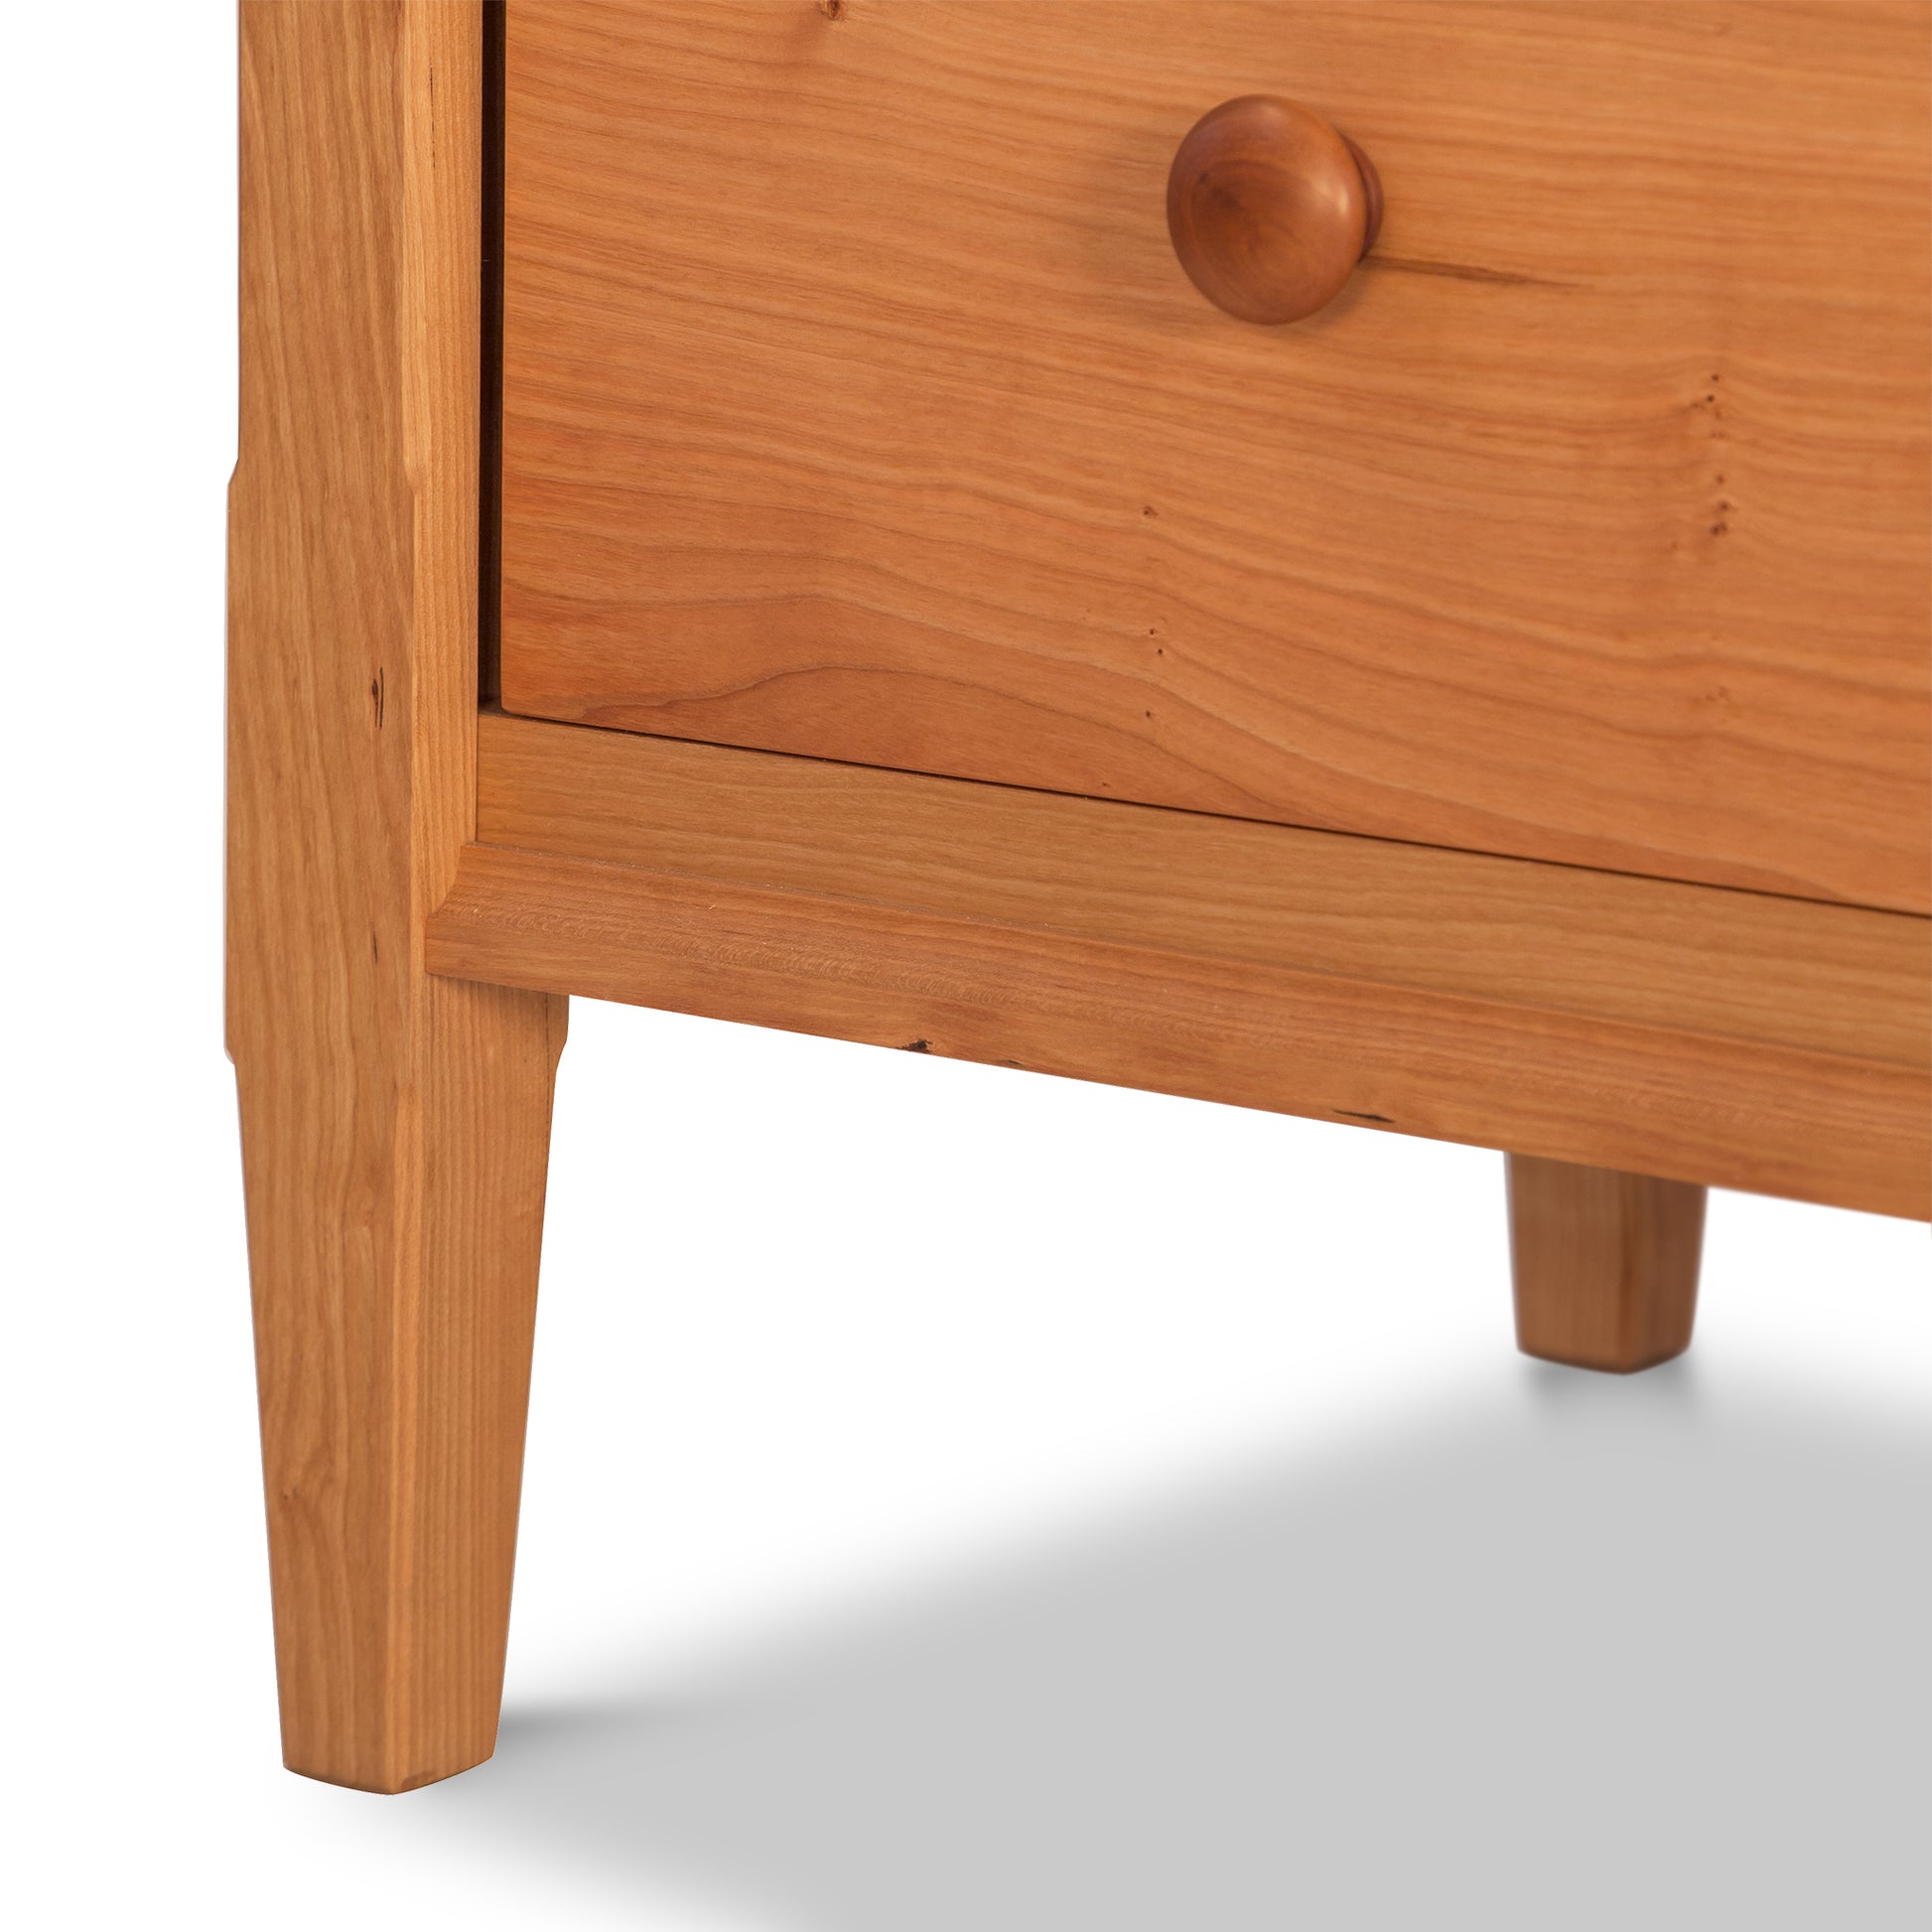 Close-up of a Vermont Shaker Extra Wide Chest by Maple Corner Woodworks featuring a single drawer with a round knob and tapered legs, highlighting the smooth, natural cherry wood grain.